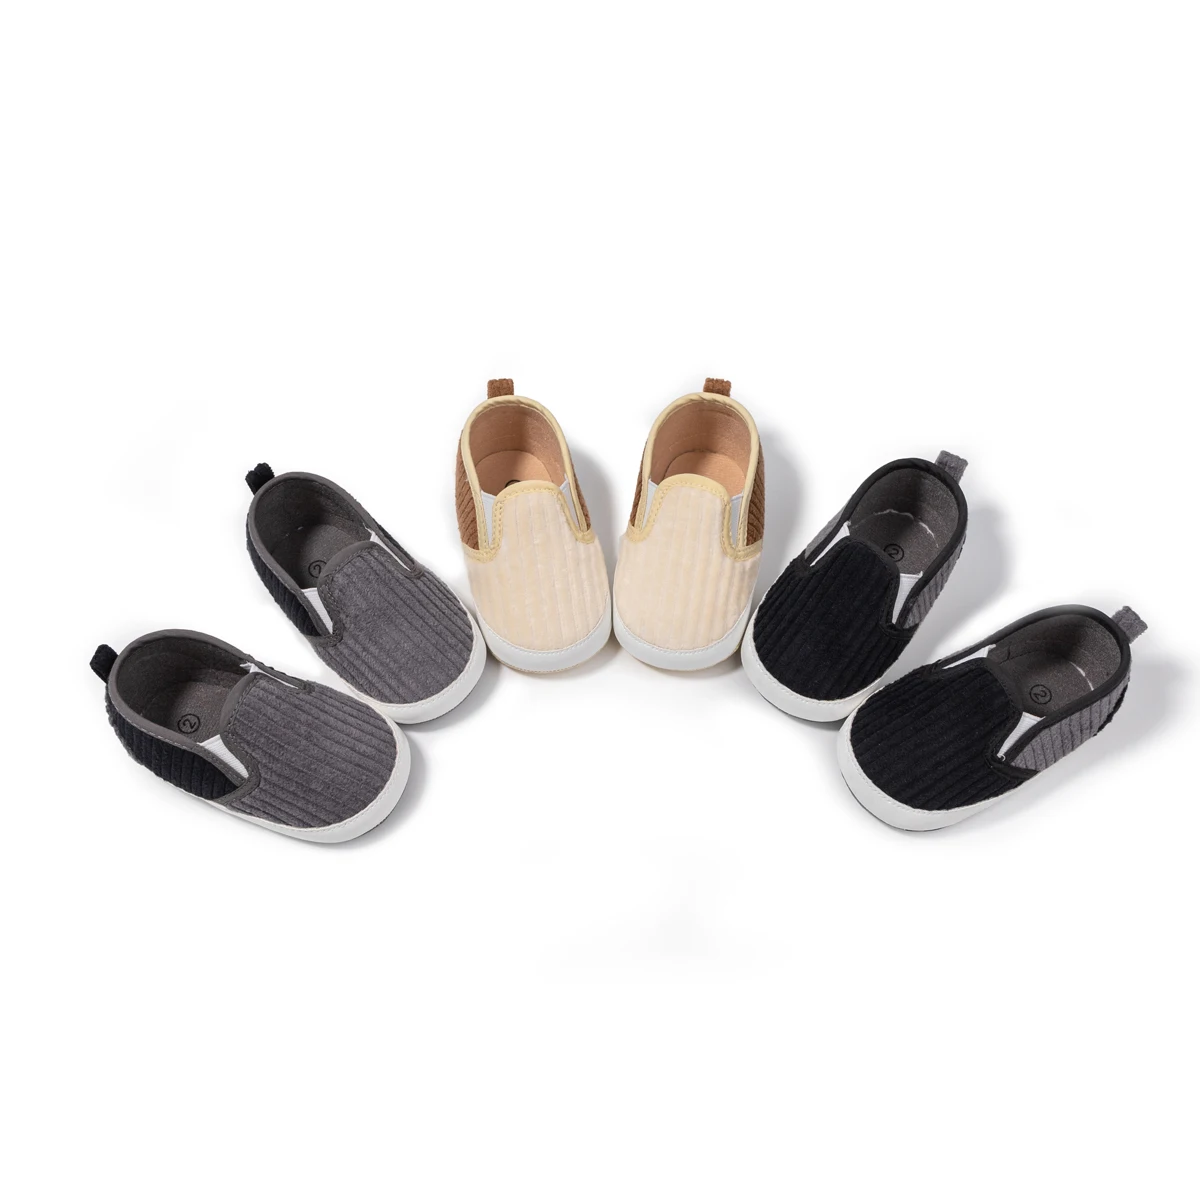 

MOQ 1 2022 New arrival indoor infant babe Anti-Slippery cotton Soft sole Light Weight baby casual shoes boys, Khaki,grey,black